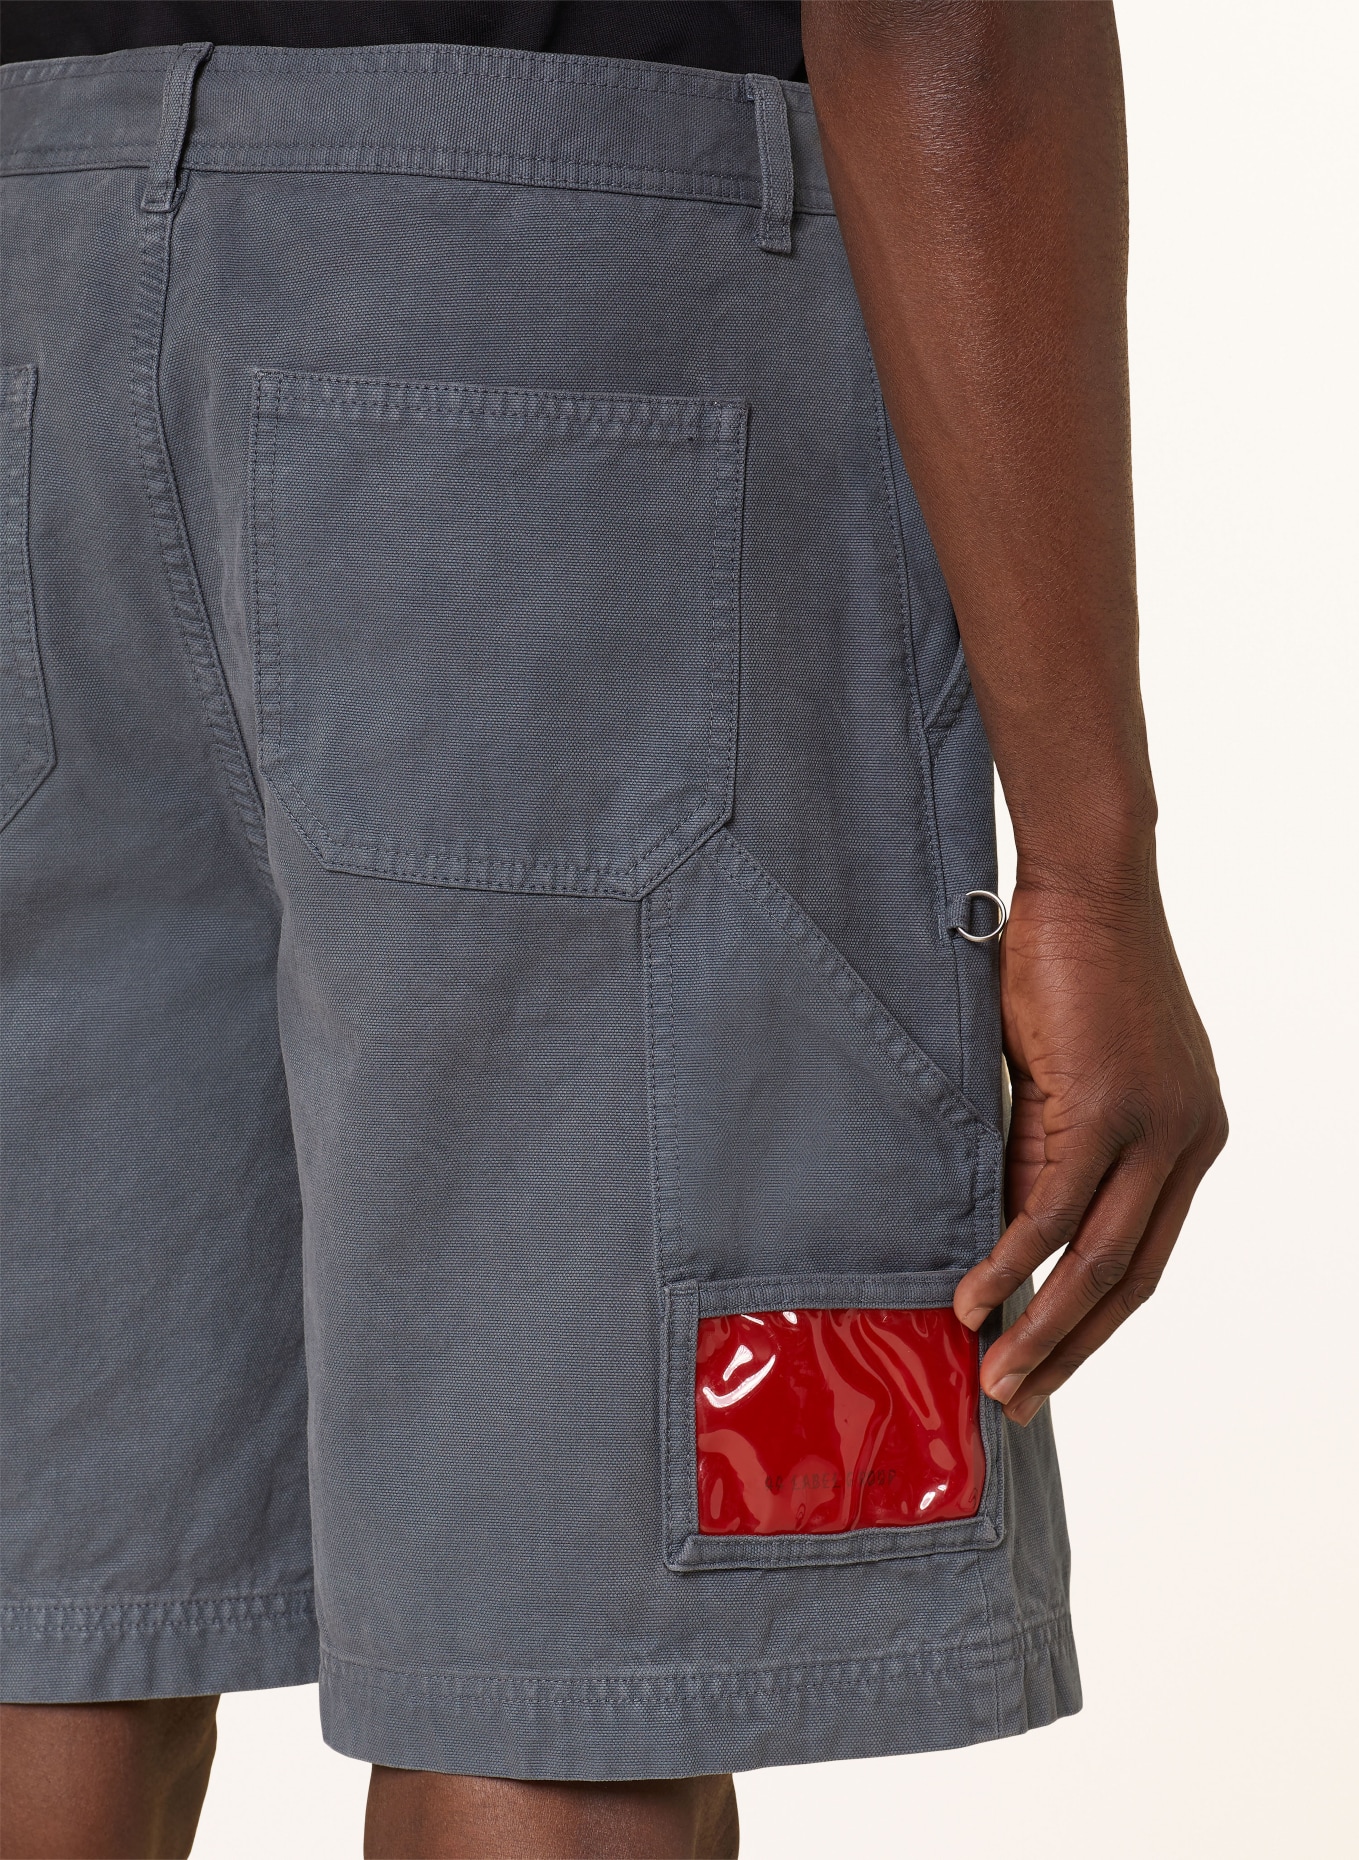 44 LABEL GROUP Cargo shorts, Color: GRAY (Image 6)